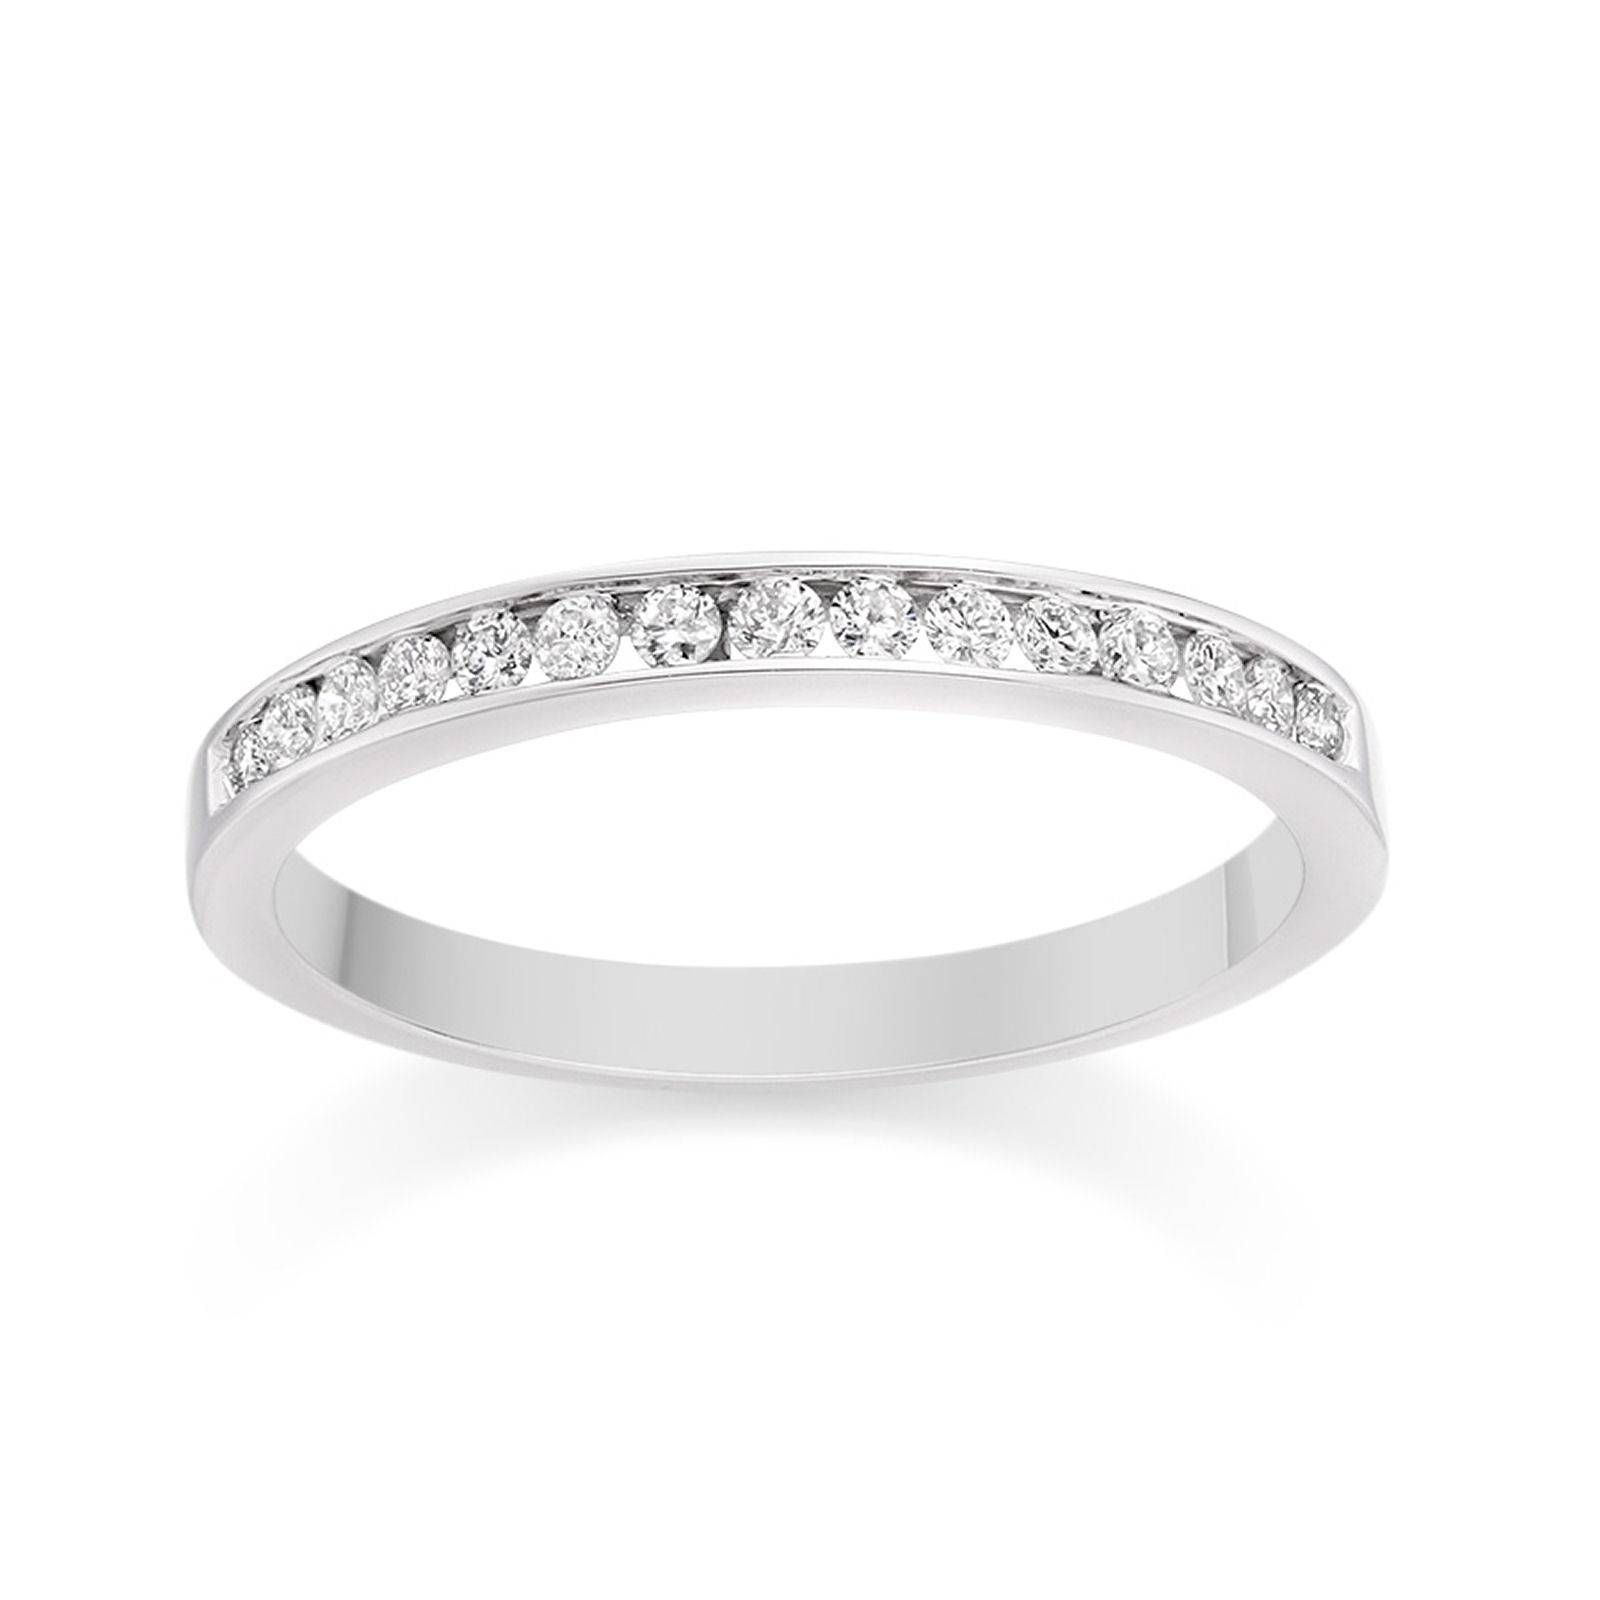 Channel Set Diamond Wedding Ring In Platinum Wedding Dress From Pertaining To Wedding Rings With Platinum Diamond (View 13 of 15)